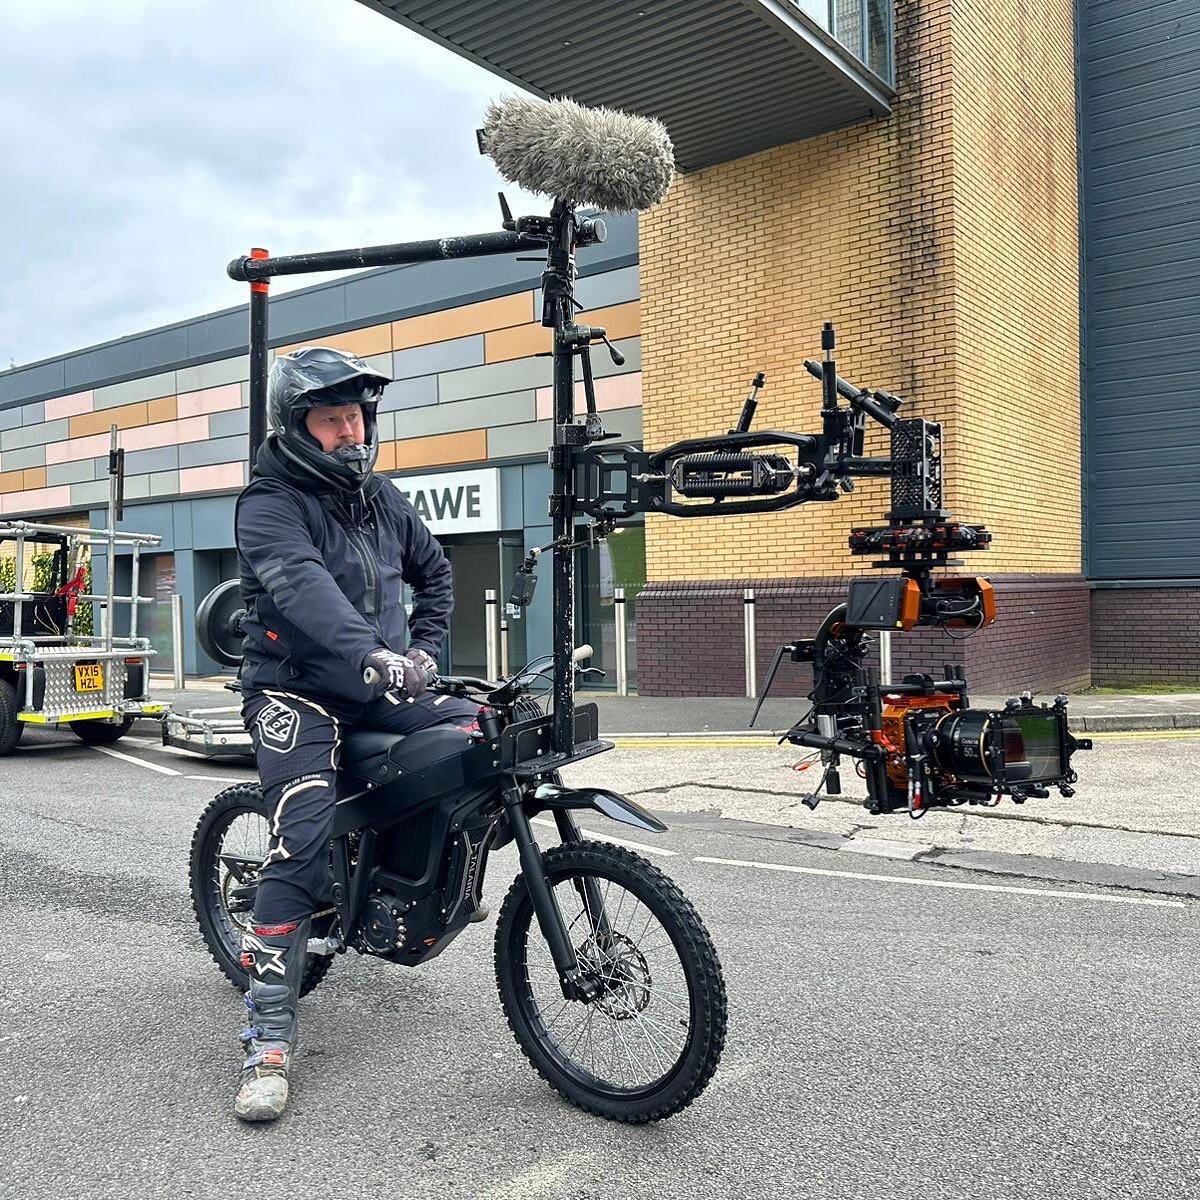 Out cruising the streets with our Cinebike. Shooting a tight follow scene through traffic with @neilhawke41 at the wheel! 
Braaaapp! 🏍️ 
#cinebike #flowcineblackarm #movipro #ignitedigi #cameratracking #cinematography #dop #director #redkomodo #cook